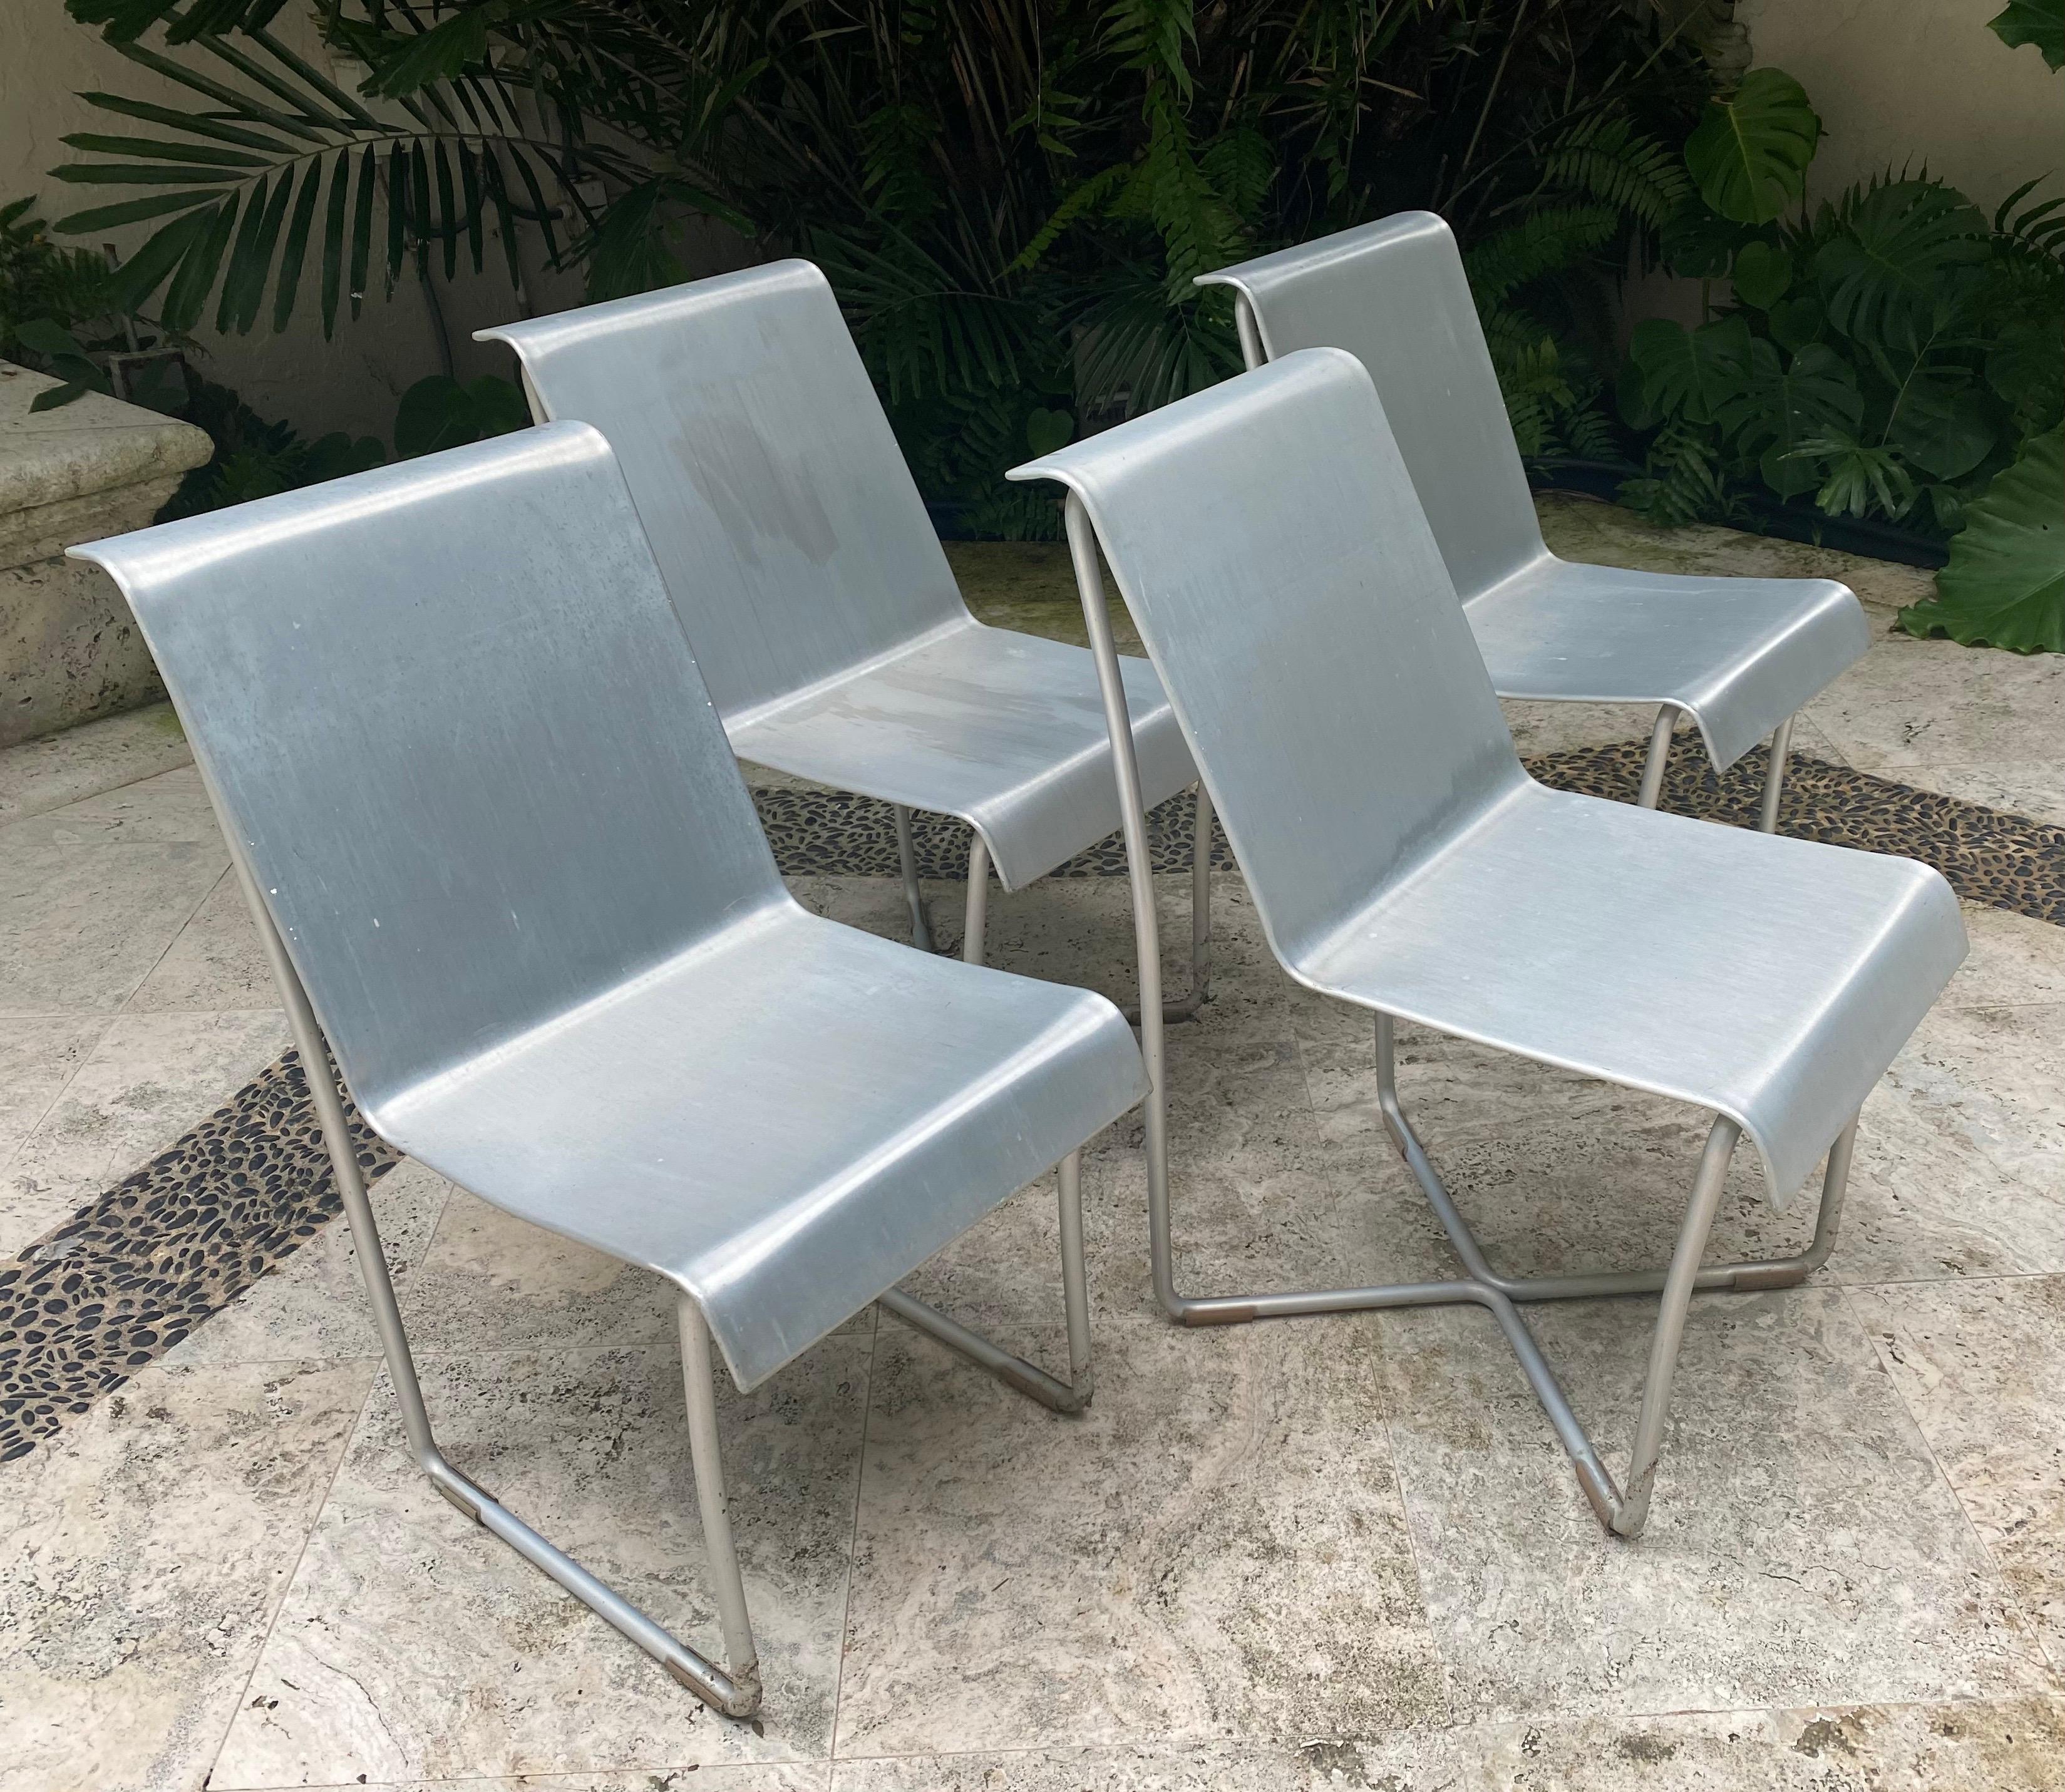 Superlight aluminum chair designed by Frank Gehry for Emeco. Four available, sold individually.